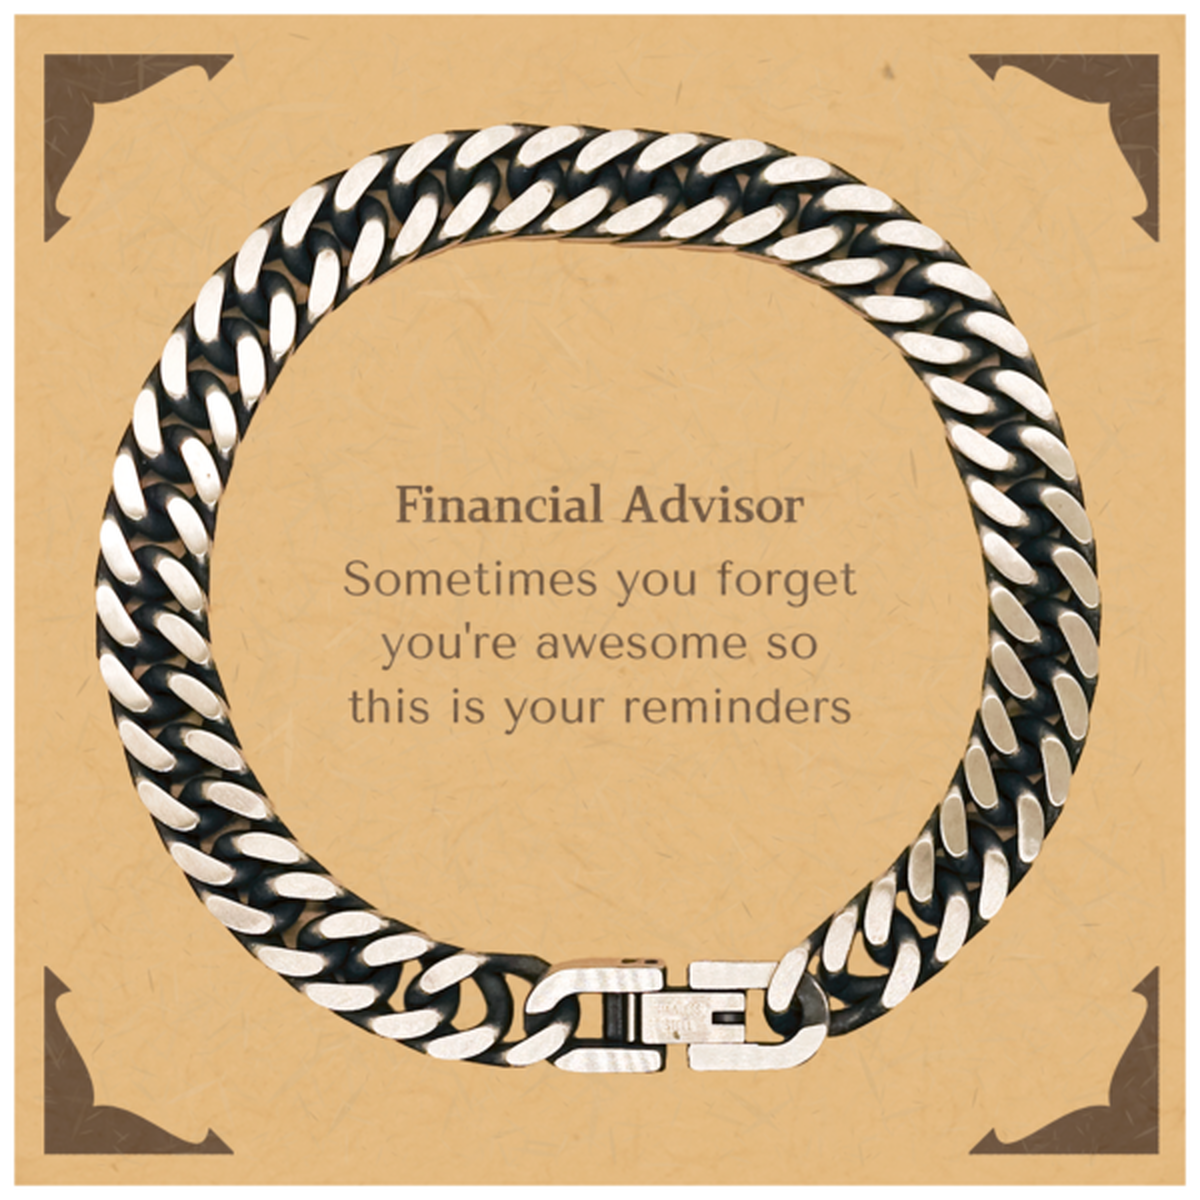 Sentimental Financial Advisor Cuban Link Chain Bracelet, Financial Advisor Sometimes you forget you're awesome so this is your reminders, Graduation Christmas Birthday Gifts for Financial Advisor, Men, Women, Coworkers